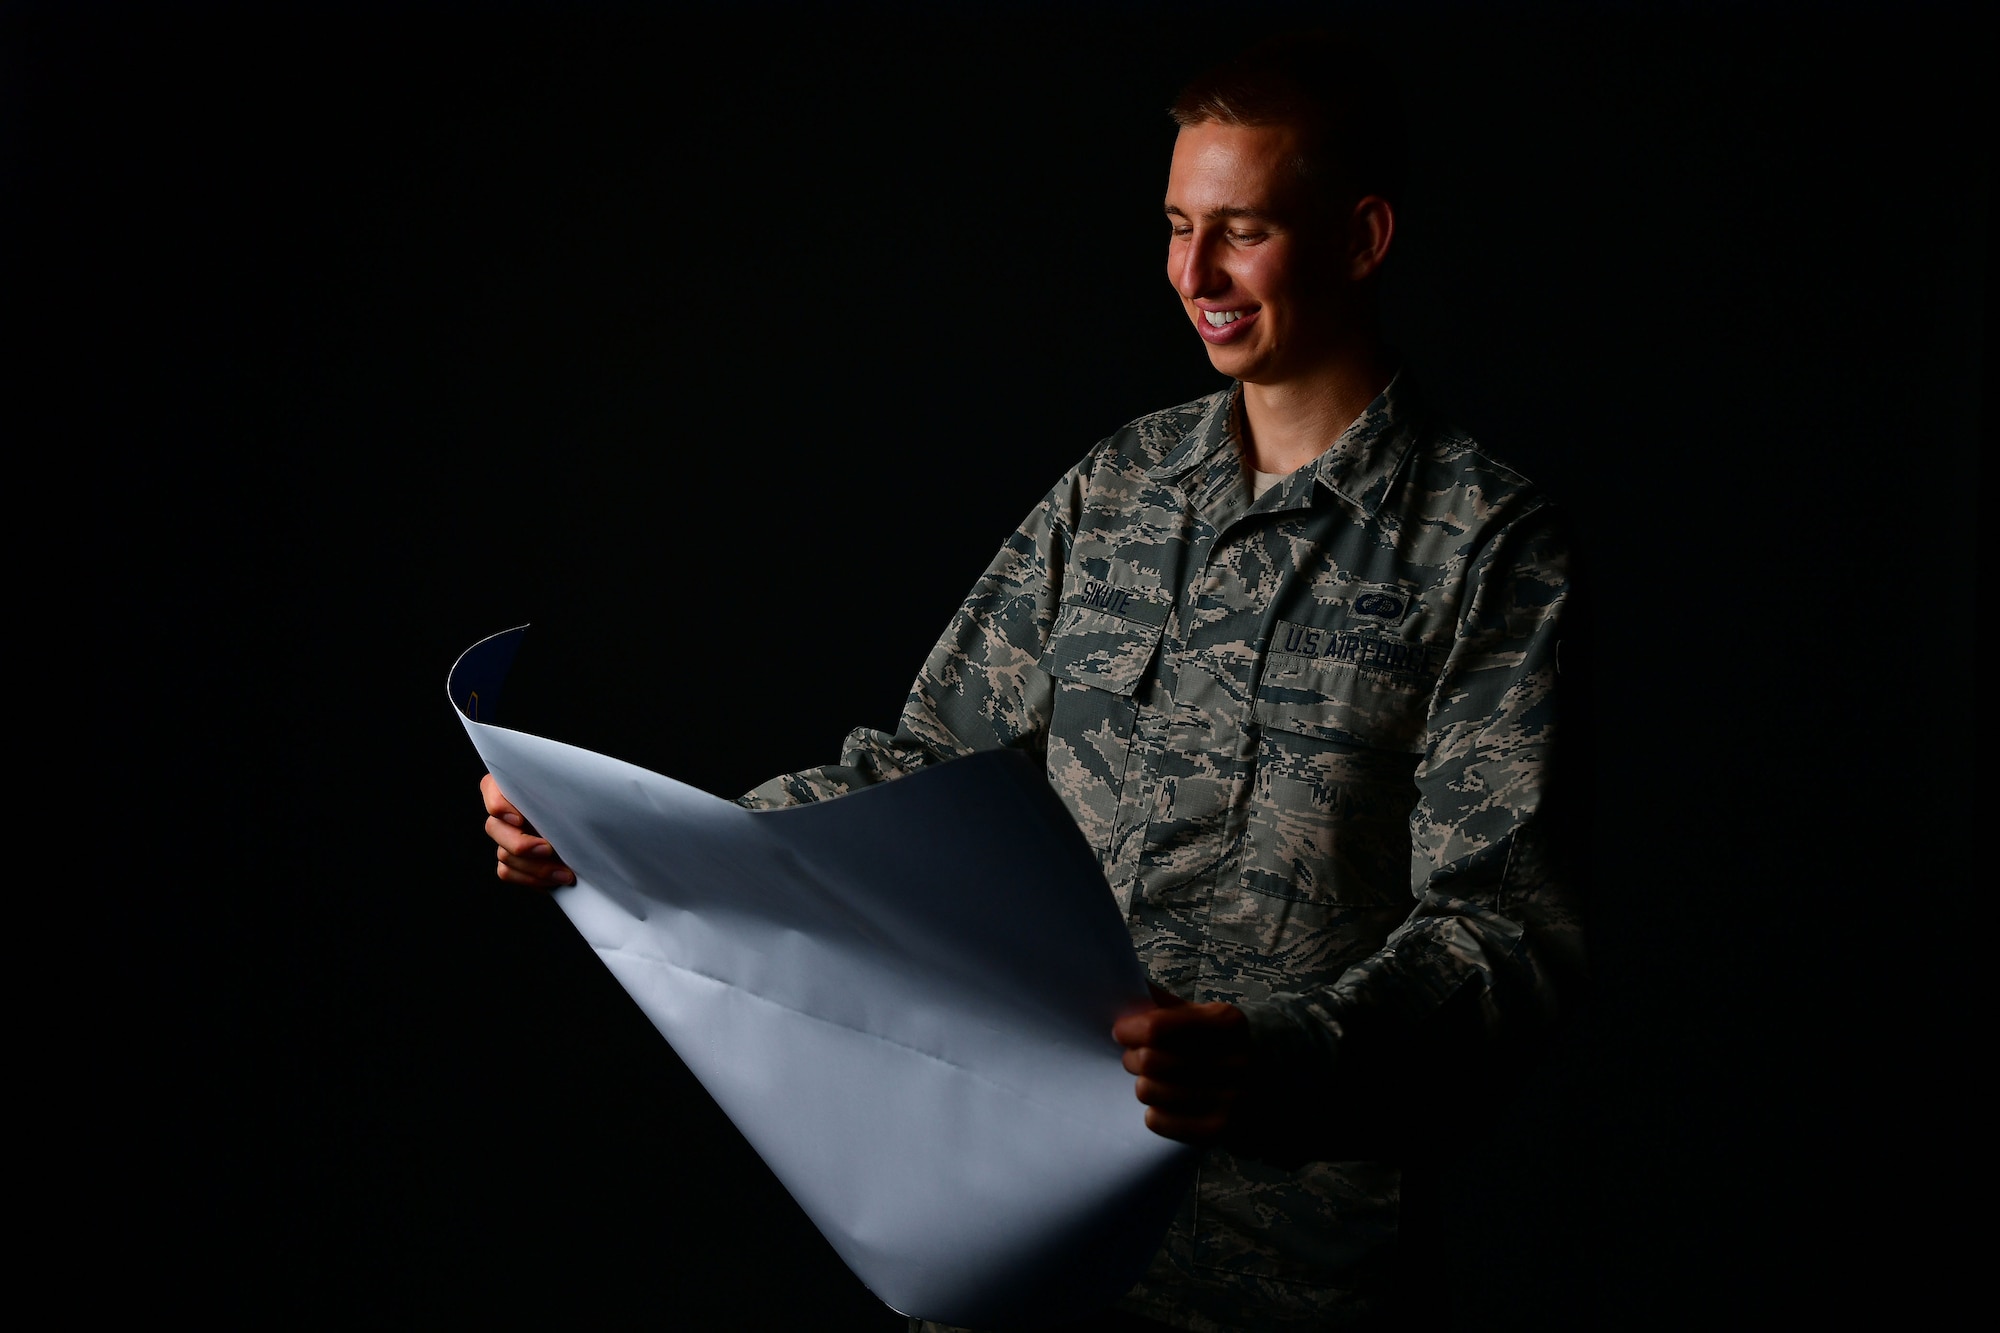 An Airman poses for a photo in the studio.